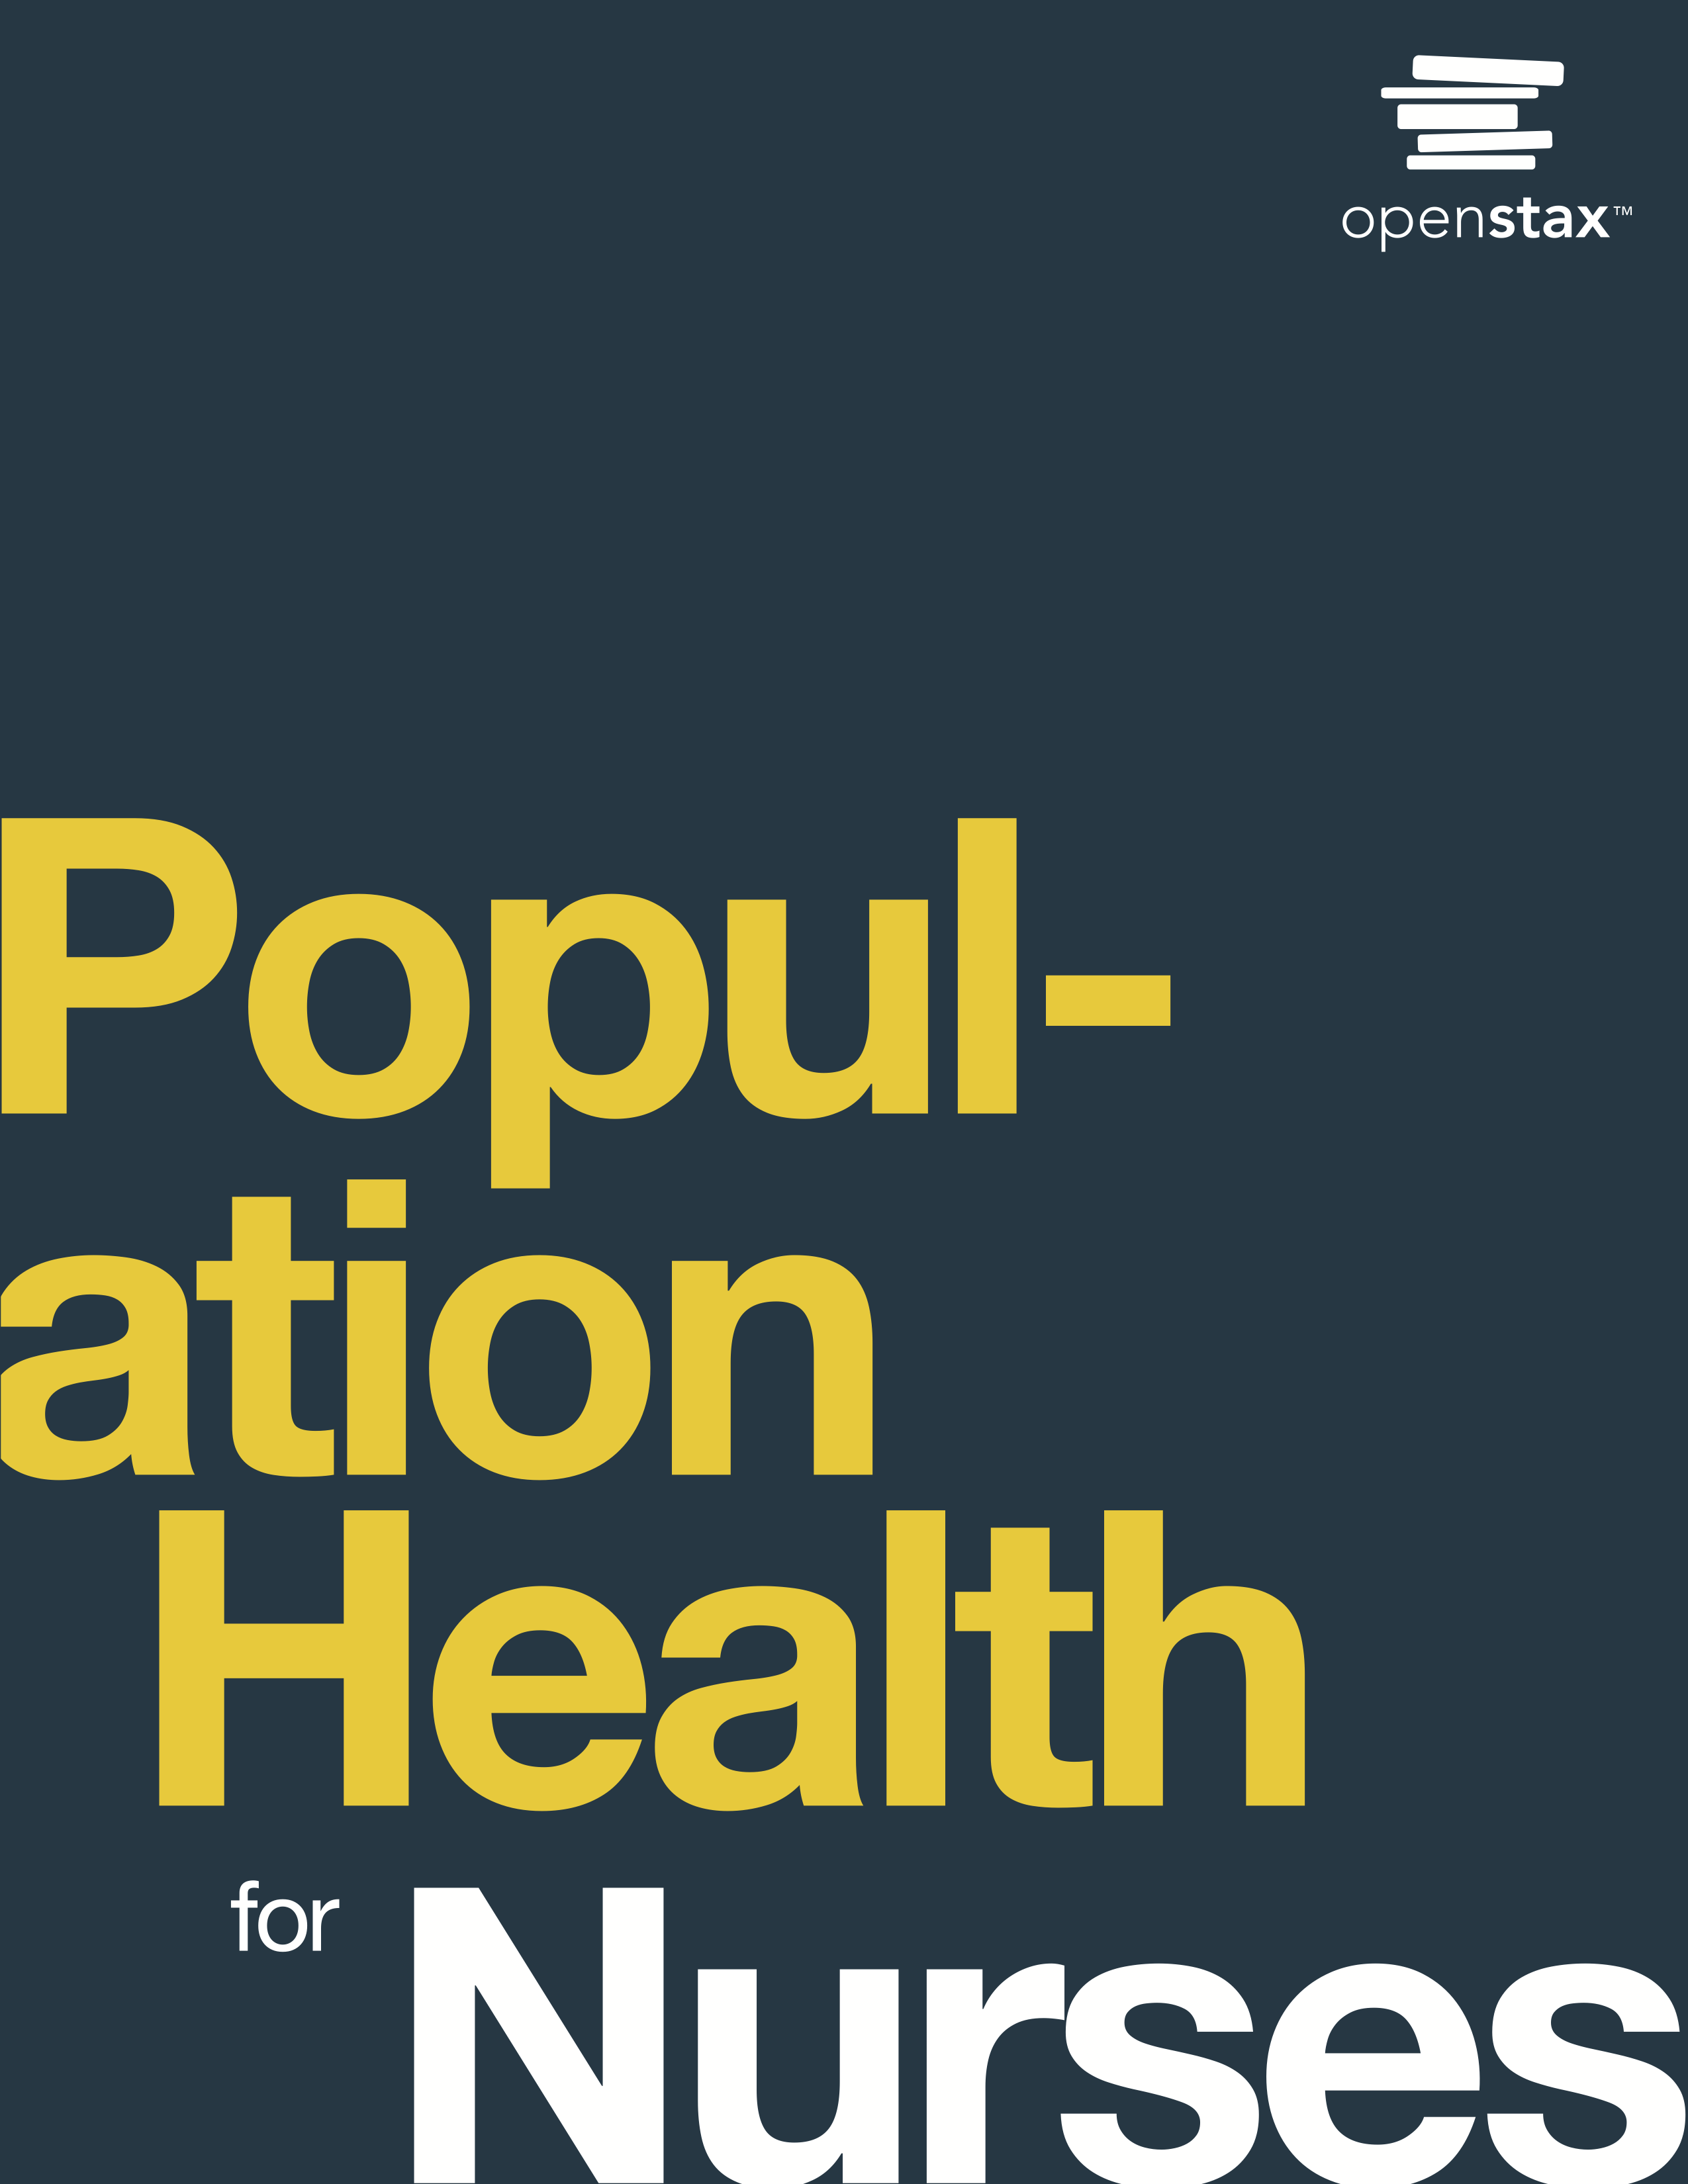 OpenStax Textbook Cover: White and yellow text on navy blue background. Text: Population Health for Nurses